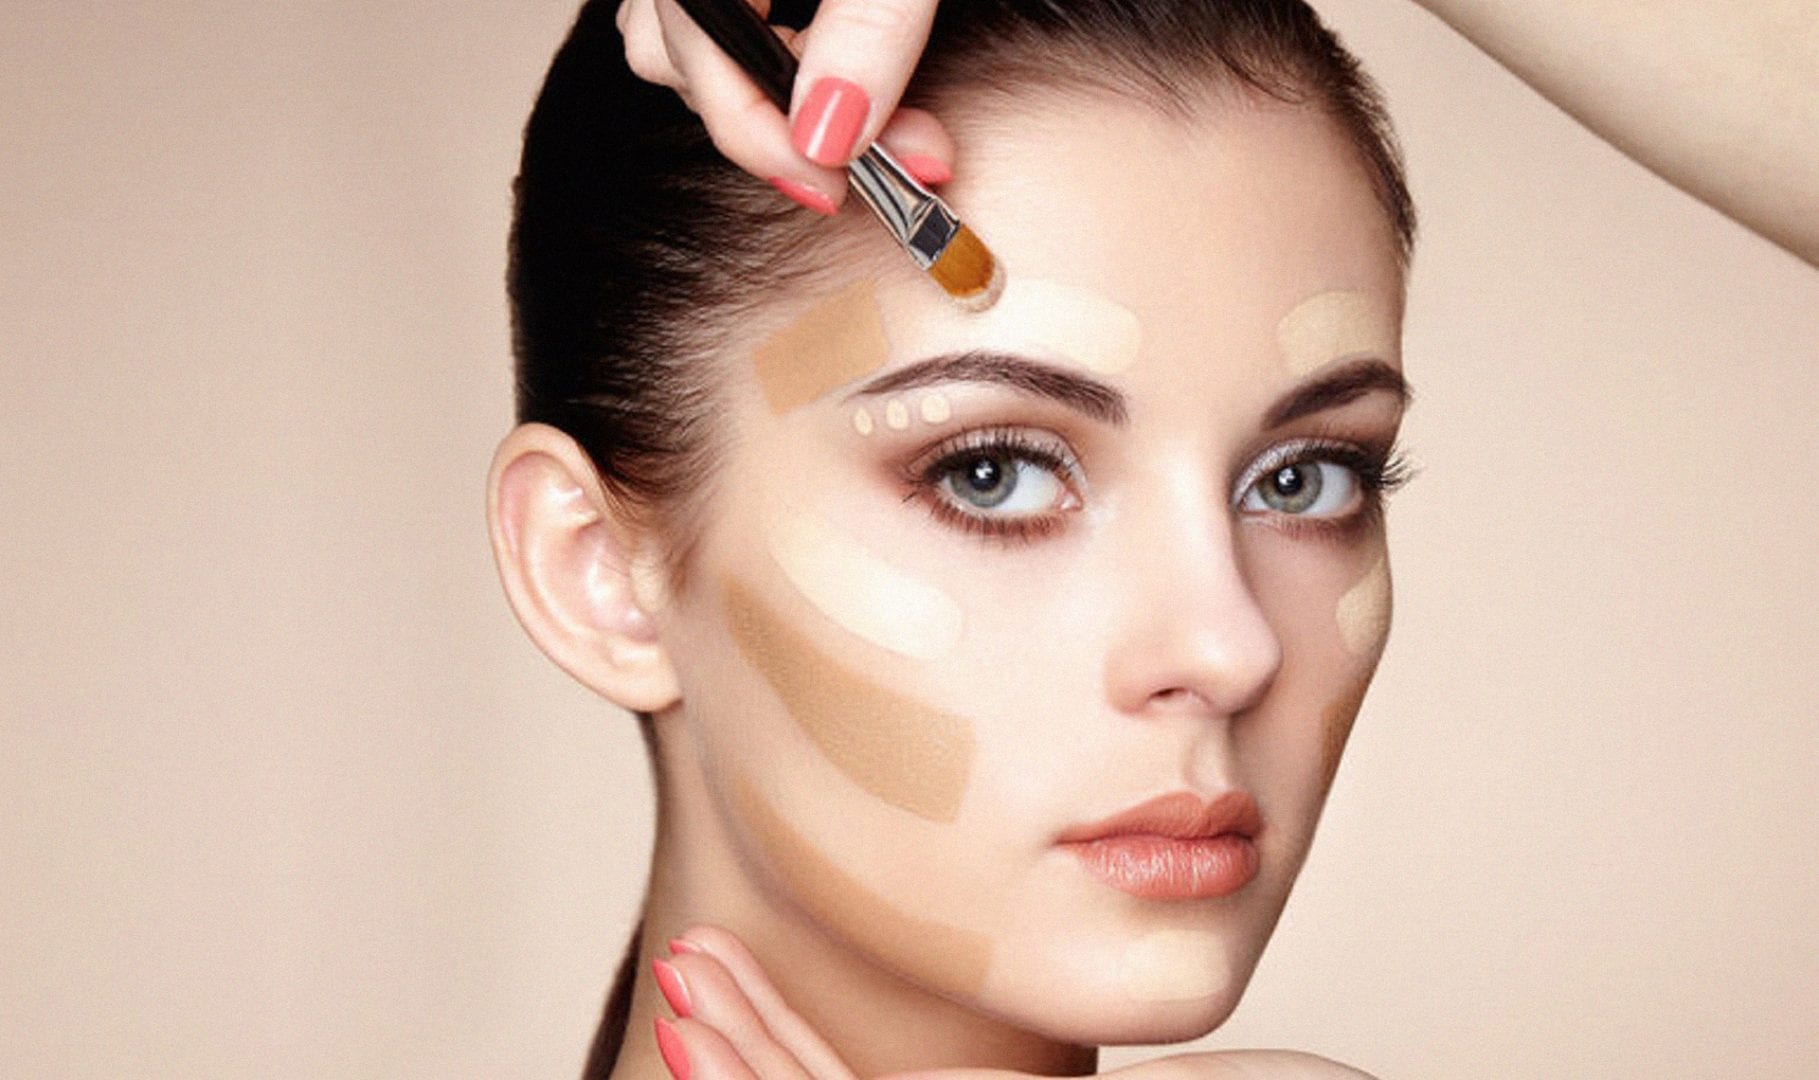 Check out the best makeup tips on the internet now